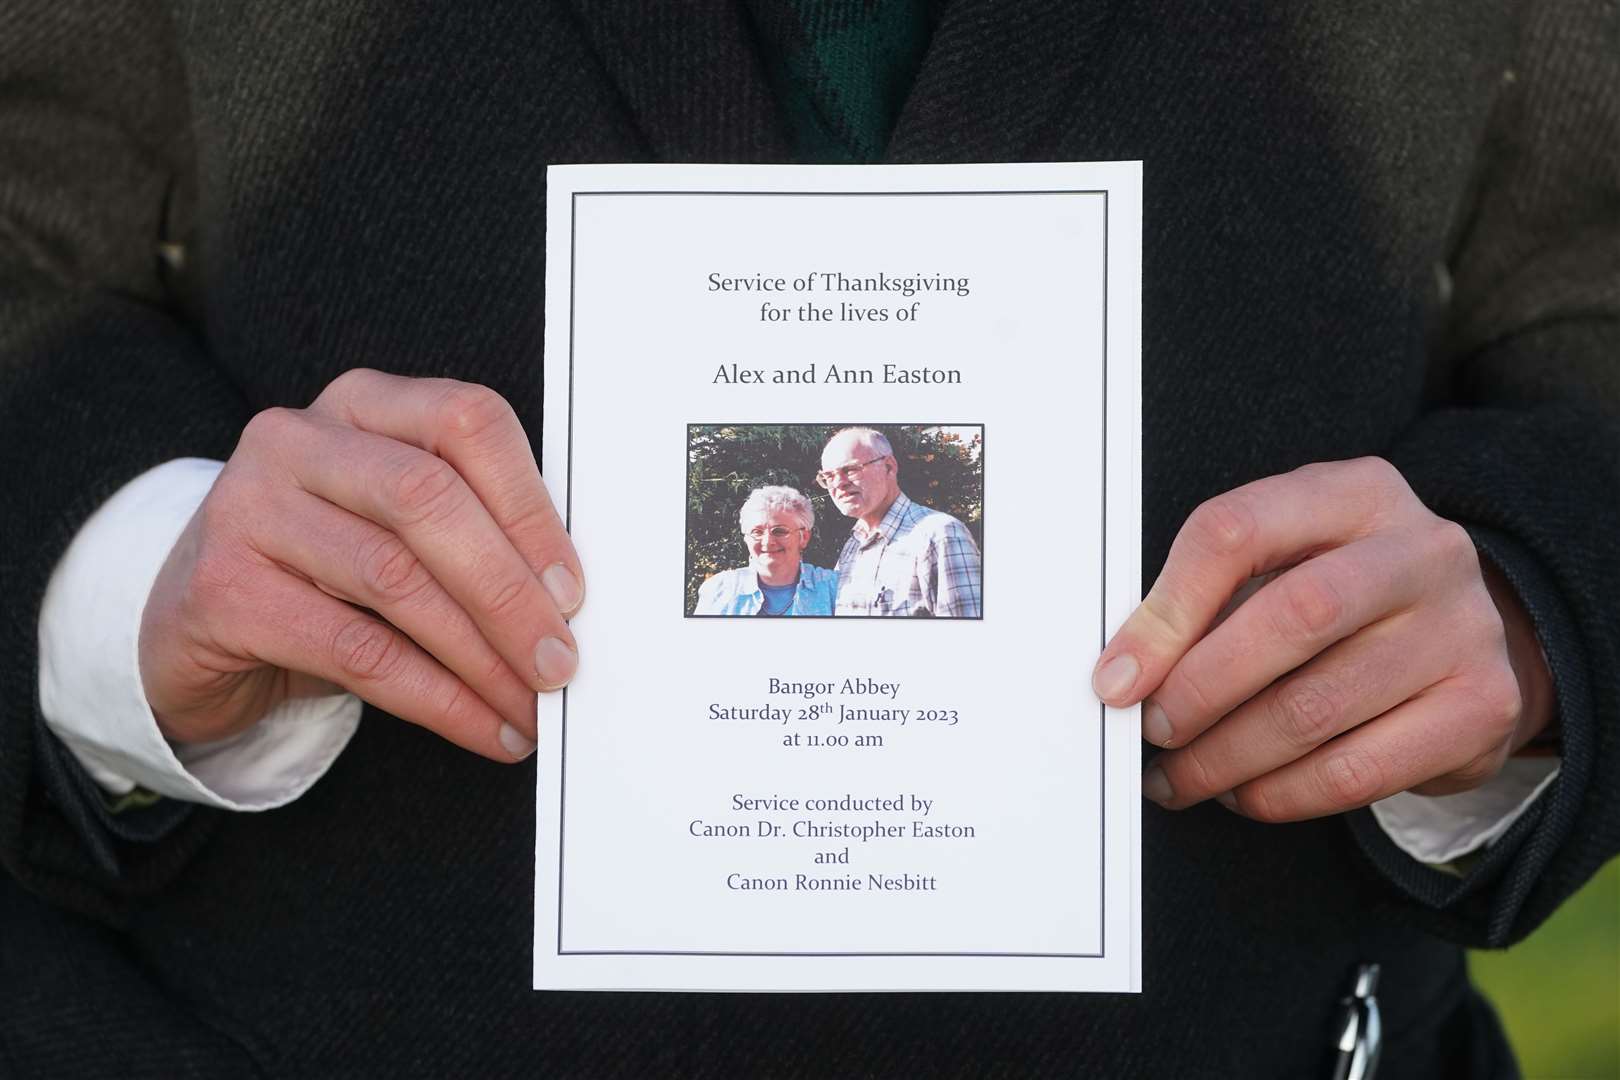 The Order of Service for the Service of Thanksgiving at Bangor Abbey (Brian Lawless/PA)